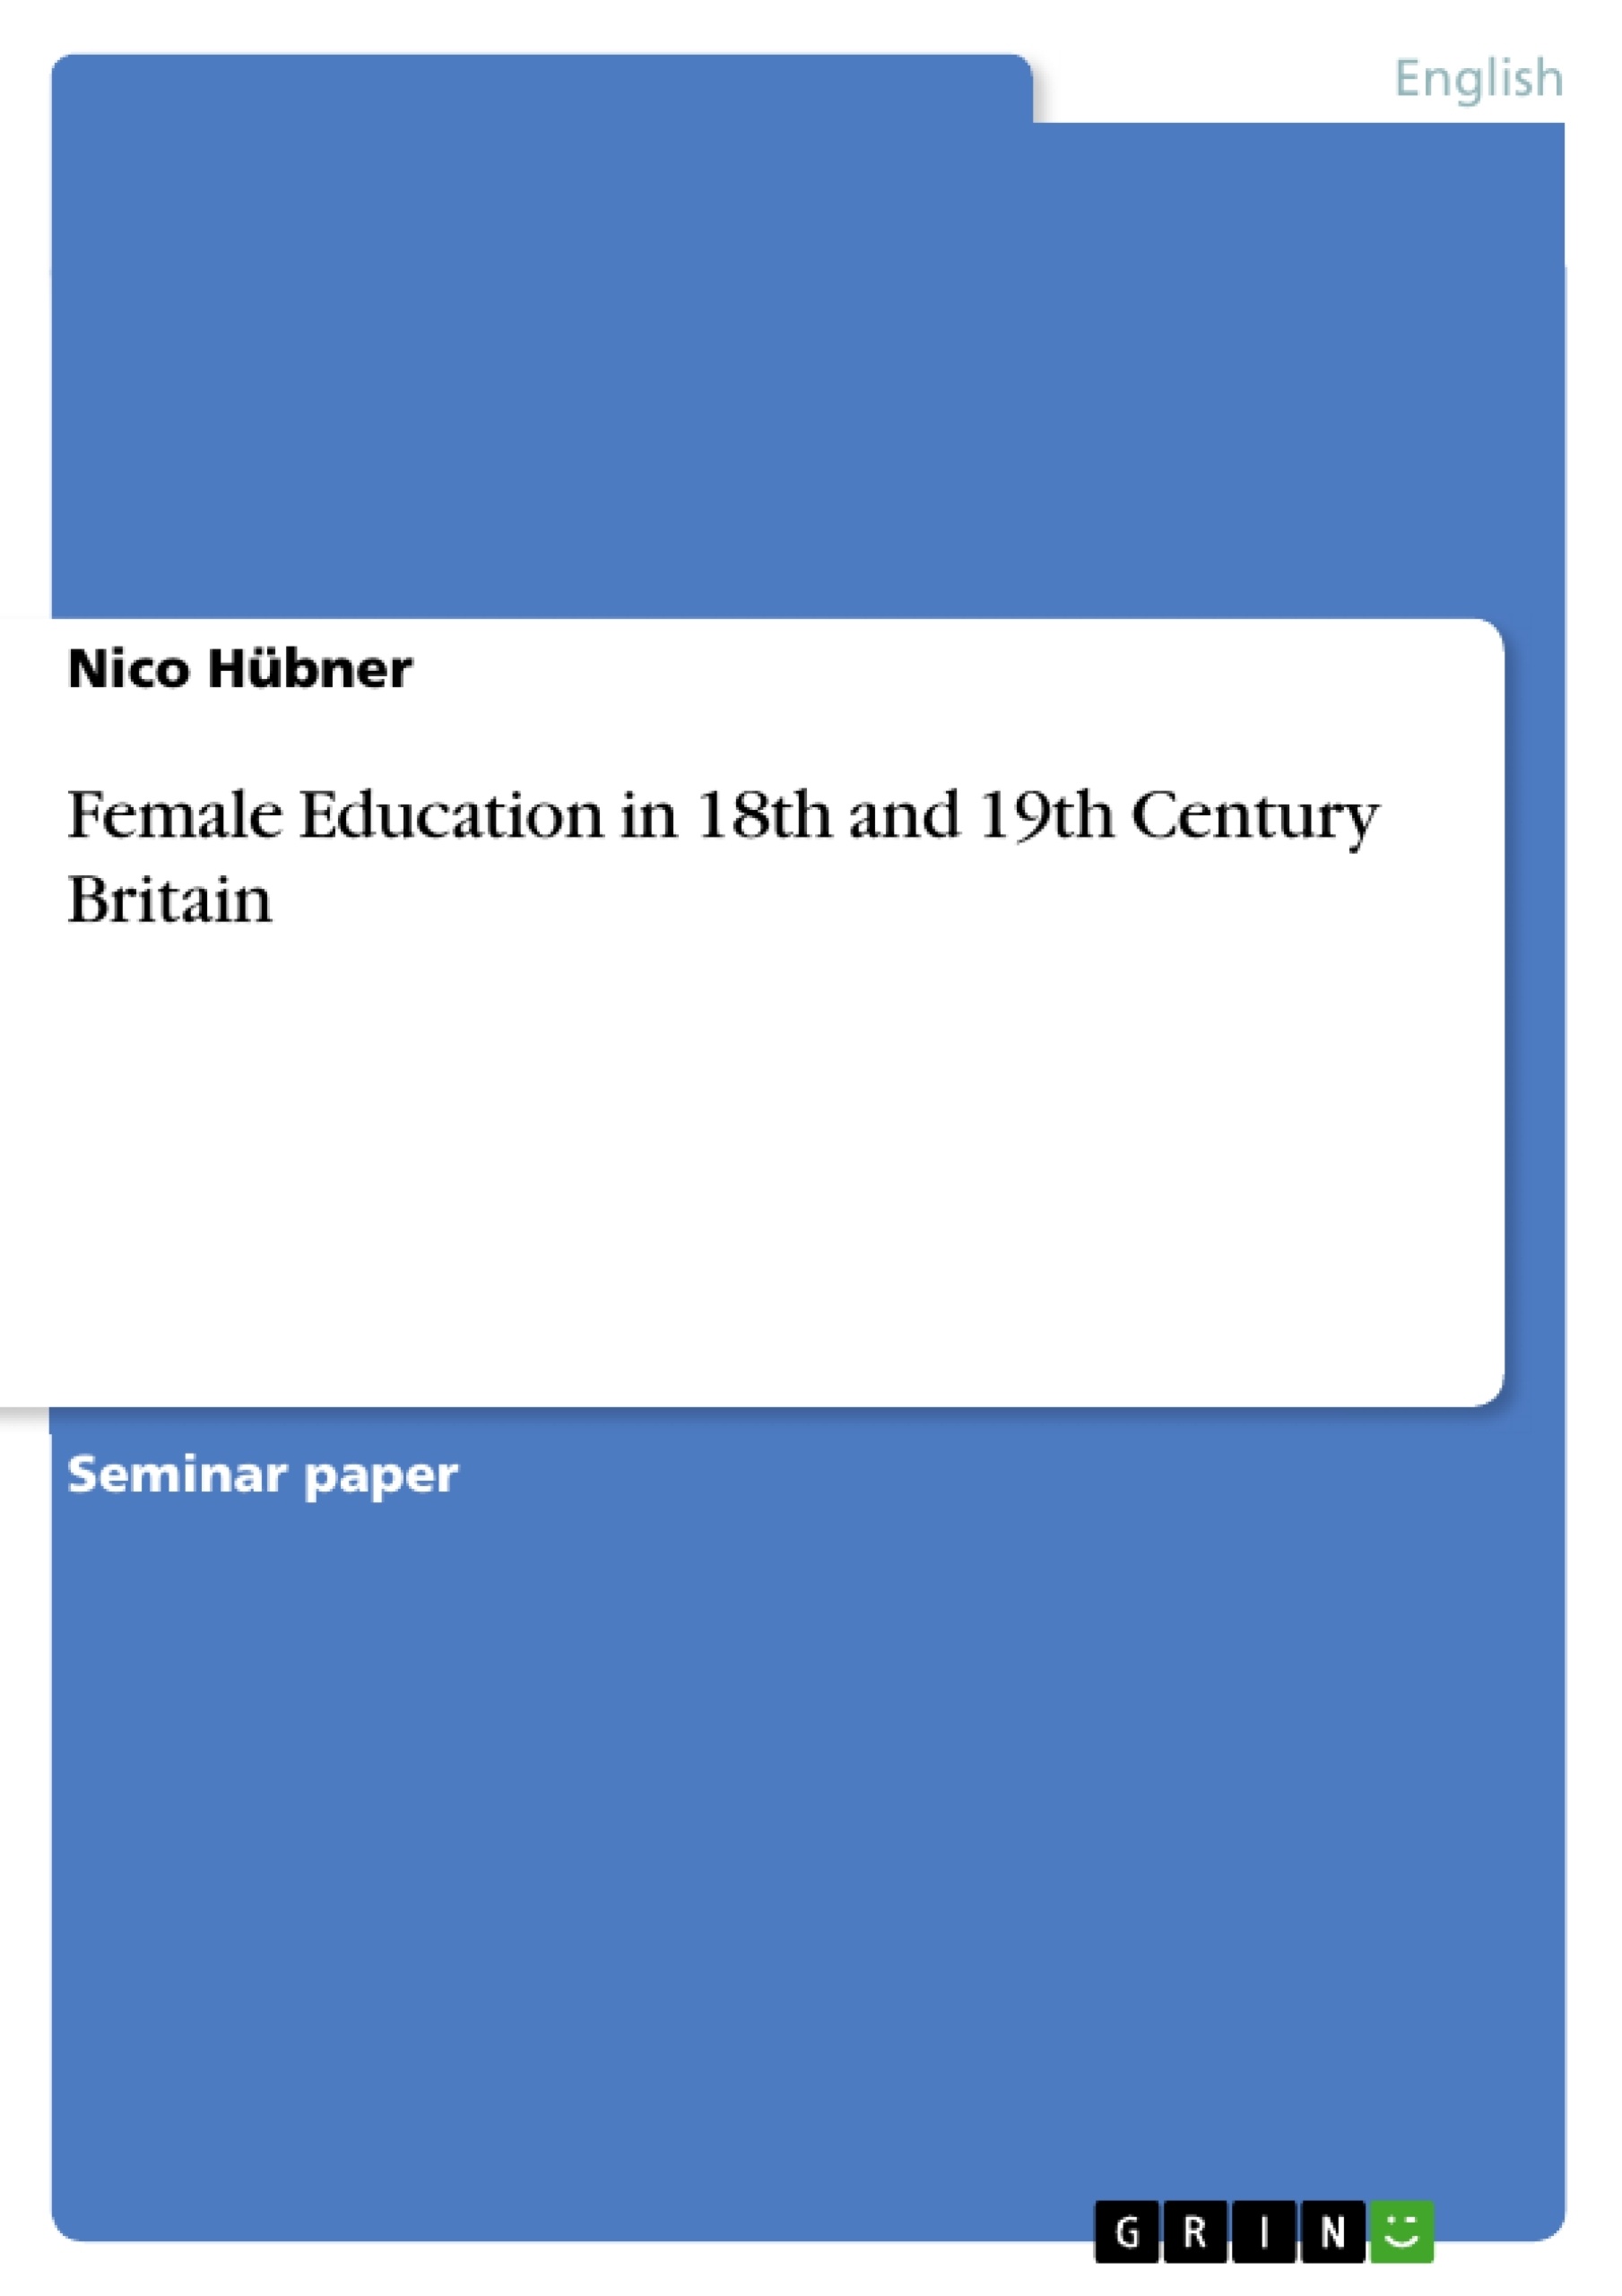 Title: Female Education in 18th and 19th Century Britain